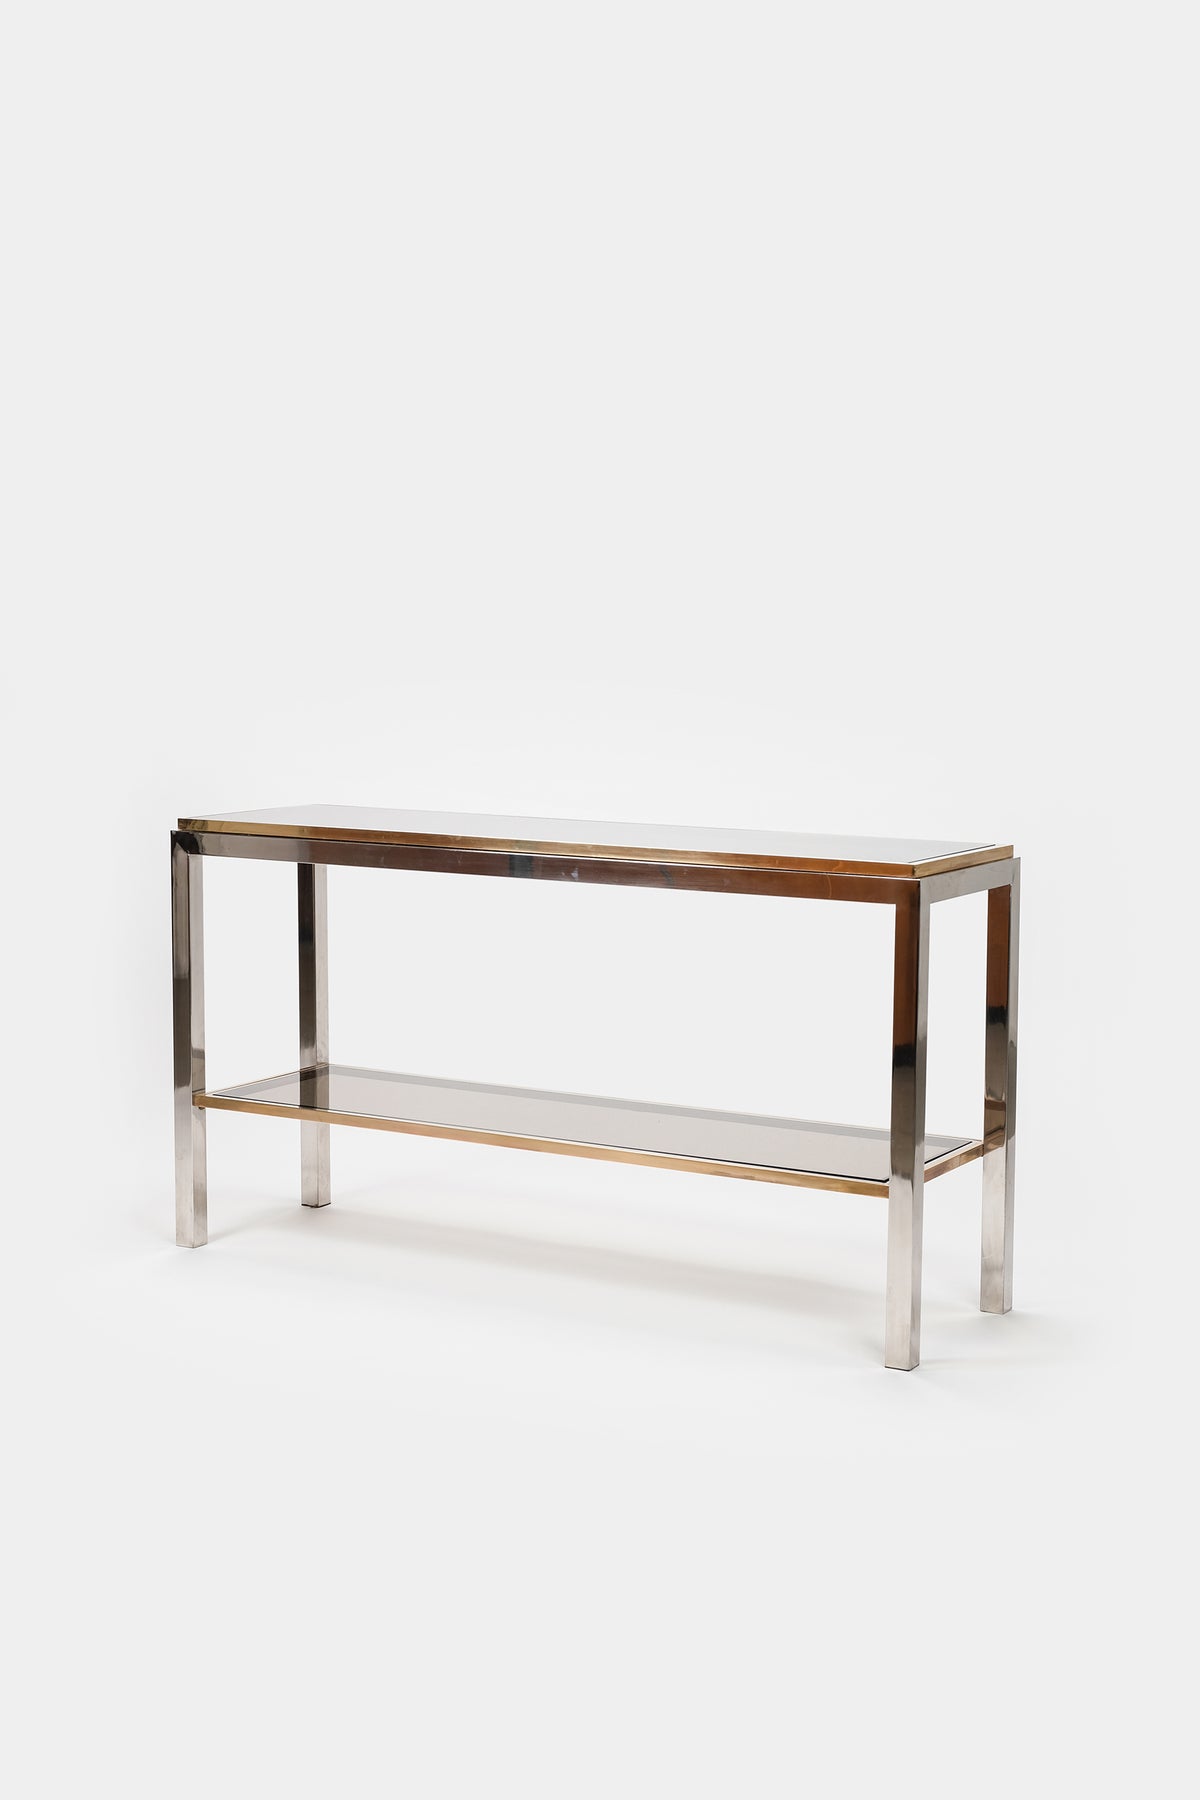 Willy Rizzo, Flaminia Console, Italy, 70s